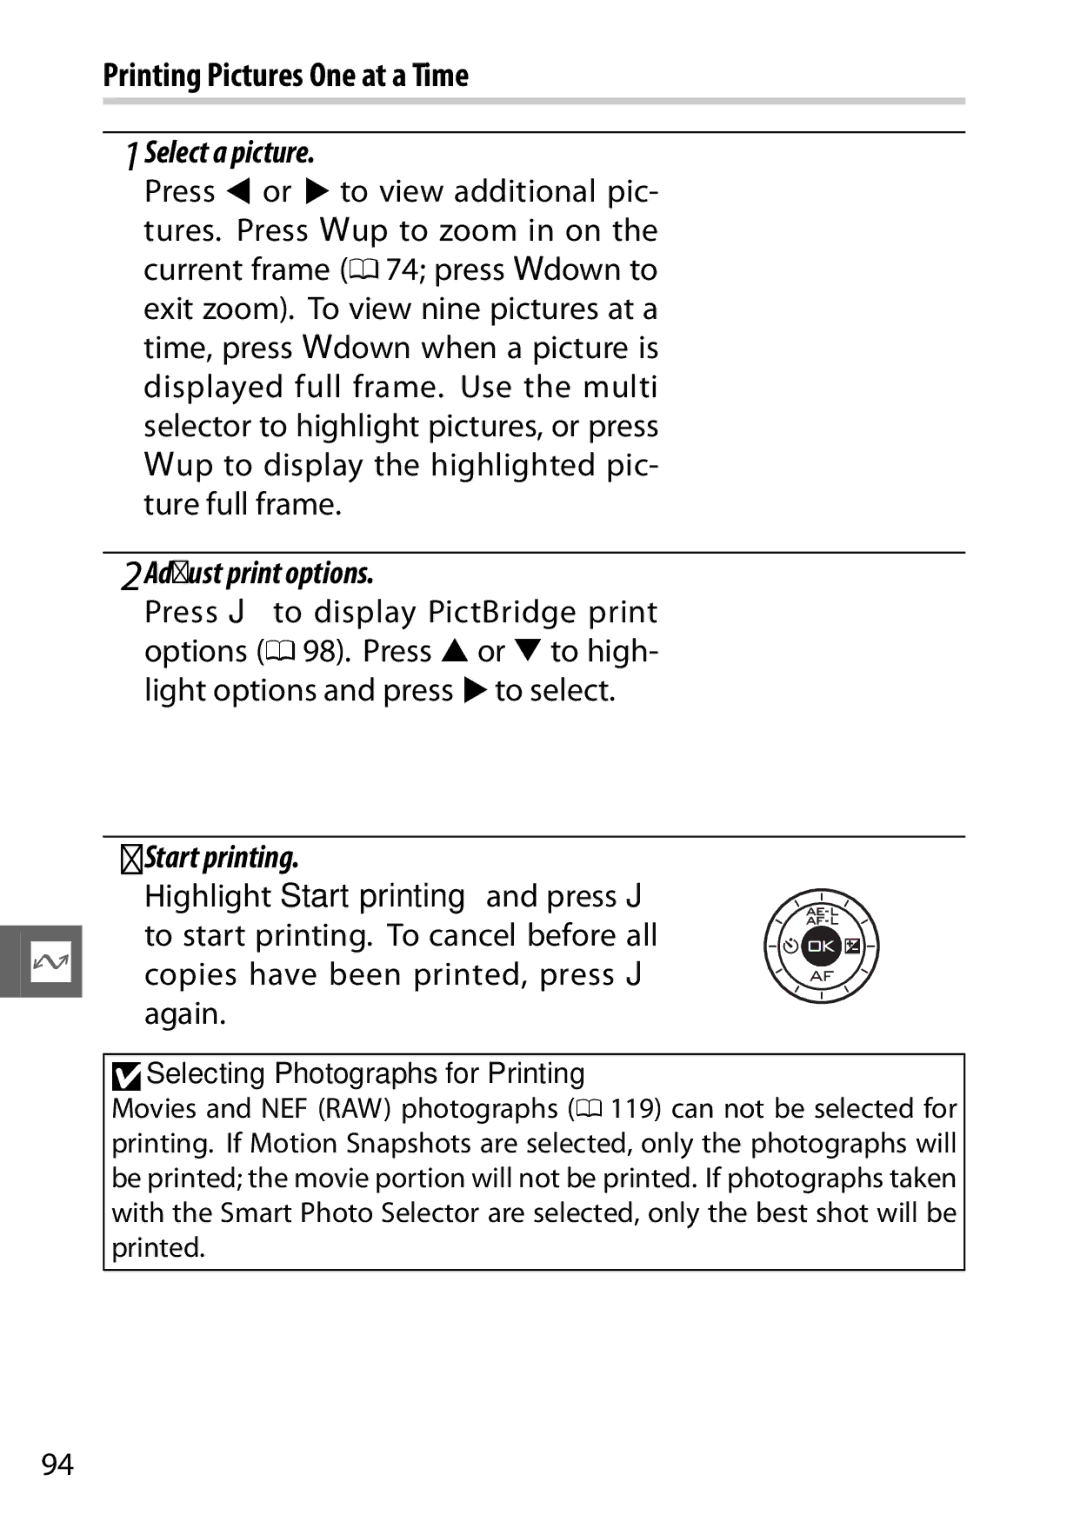 Nikon V1 Printing Pictures One at a Time, Adjust print options, Start printing, Copies have been printed, press J, Again 